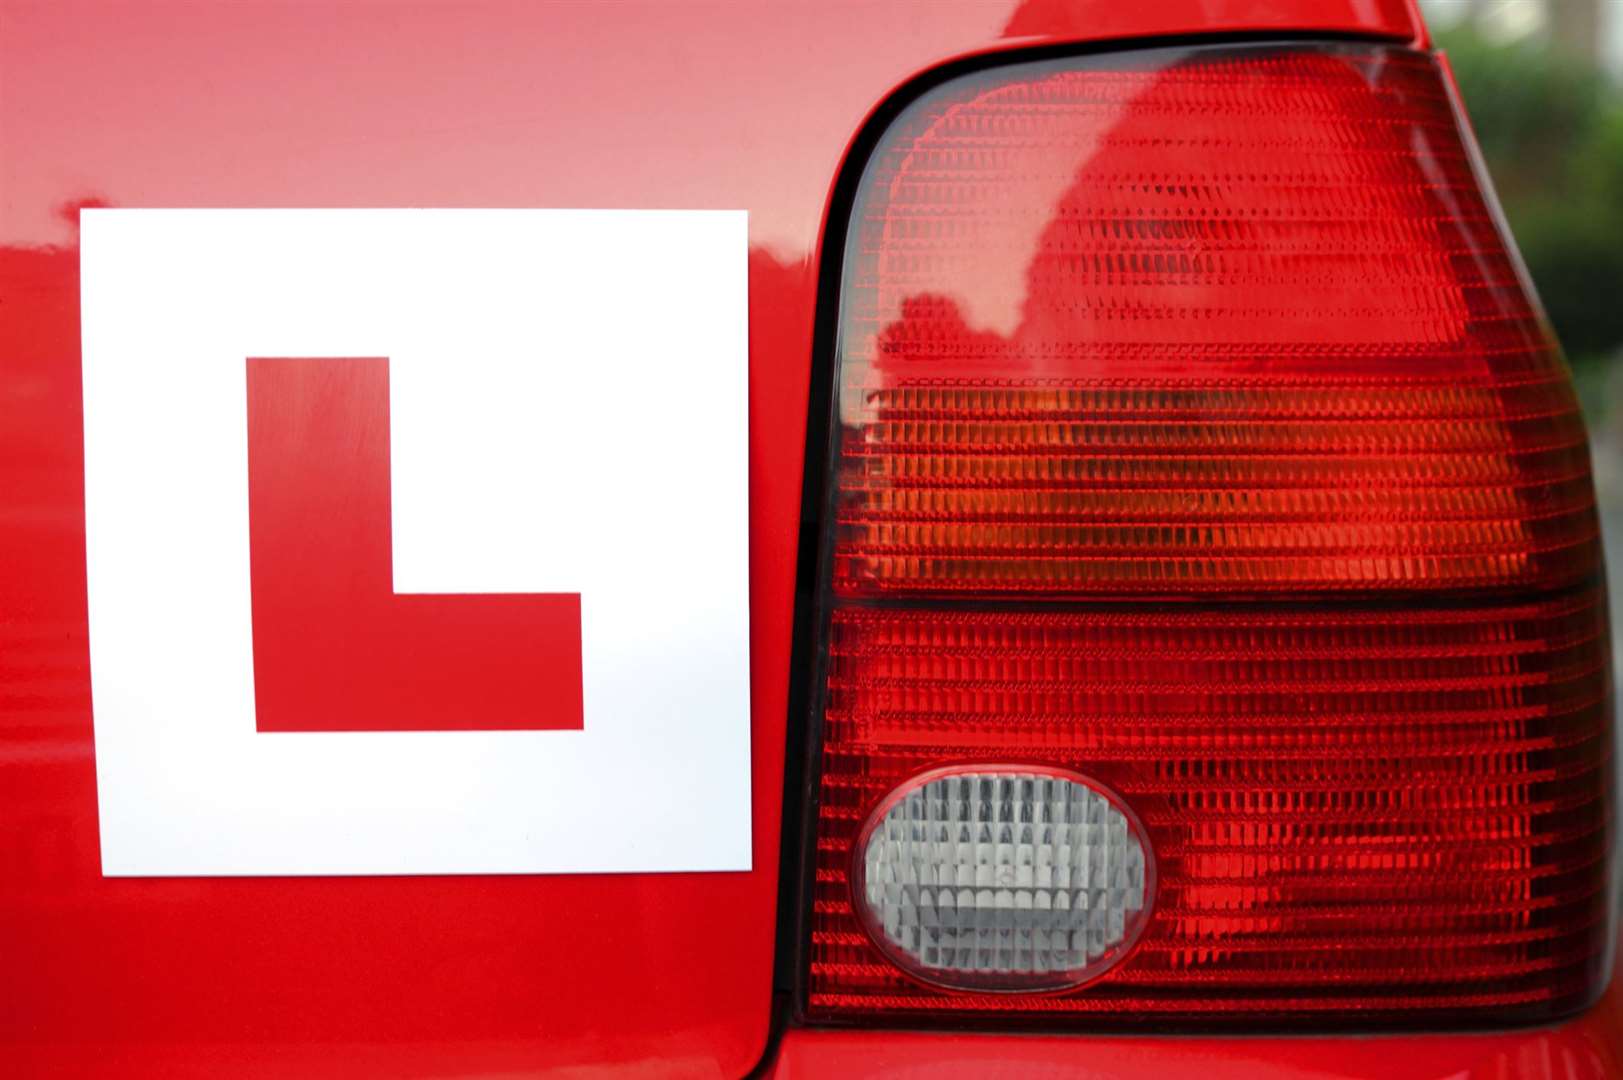 Learner drivers in Erith and Belvedere had the lowest pass rates in the entire country while at Folkestone and Herne Bay approximately half of all tests resulted in fails. Picture: Chris Hepburn /Getty Images/ iStockphoto